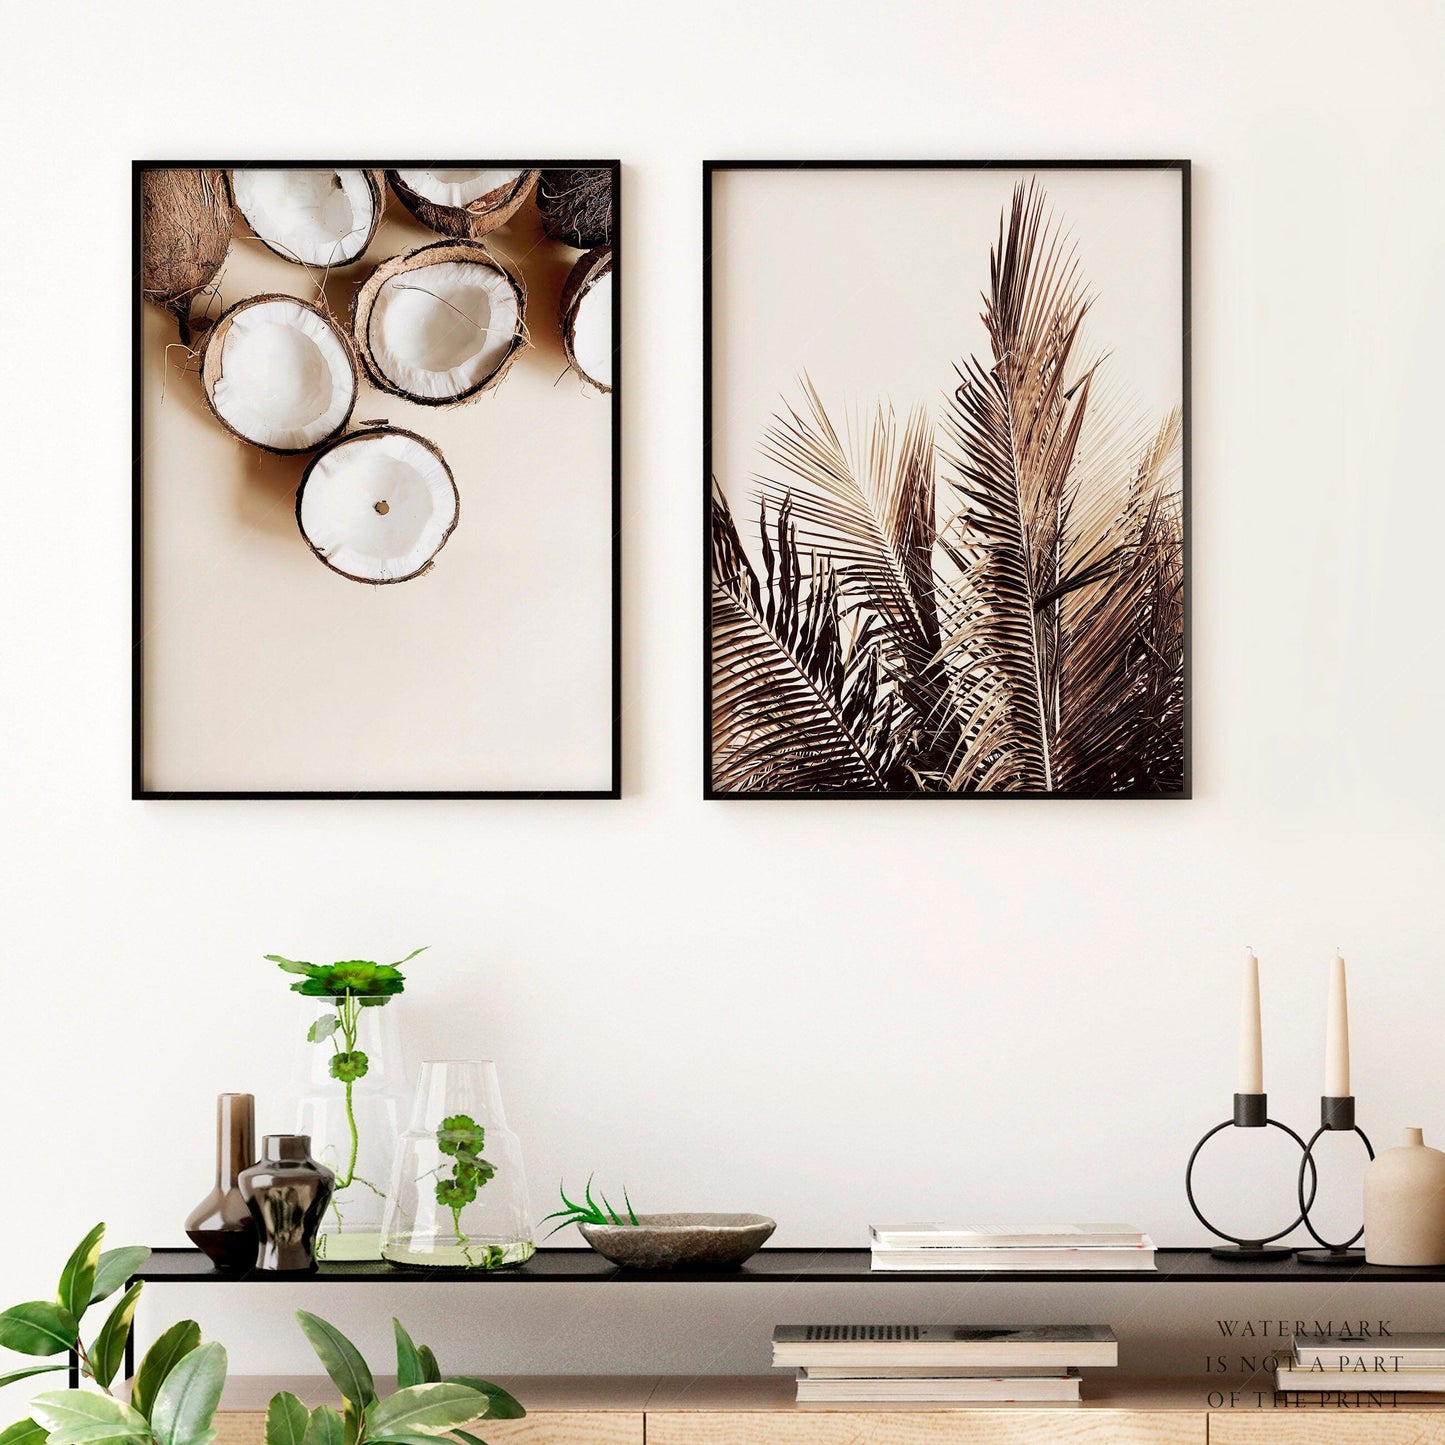 Home Poster Decor Set of 2 Tropical Print, Summer Wall Decor, Coconut Tree, Palm Leaf, Neutral Wall Decor, Beige Earth Tones, Set of 2, Above Sofa, Kitchen Dine Room